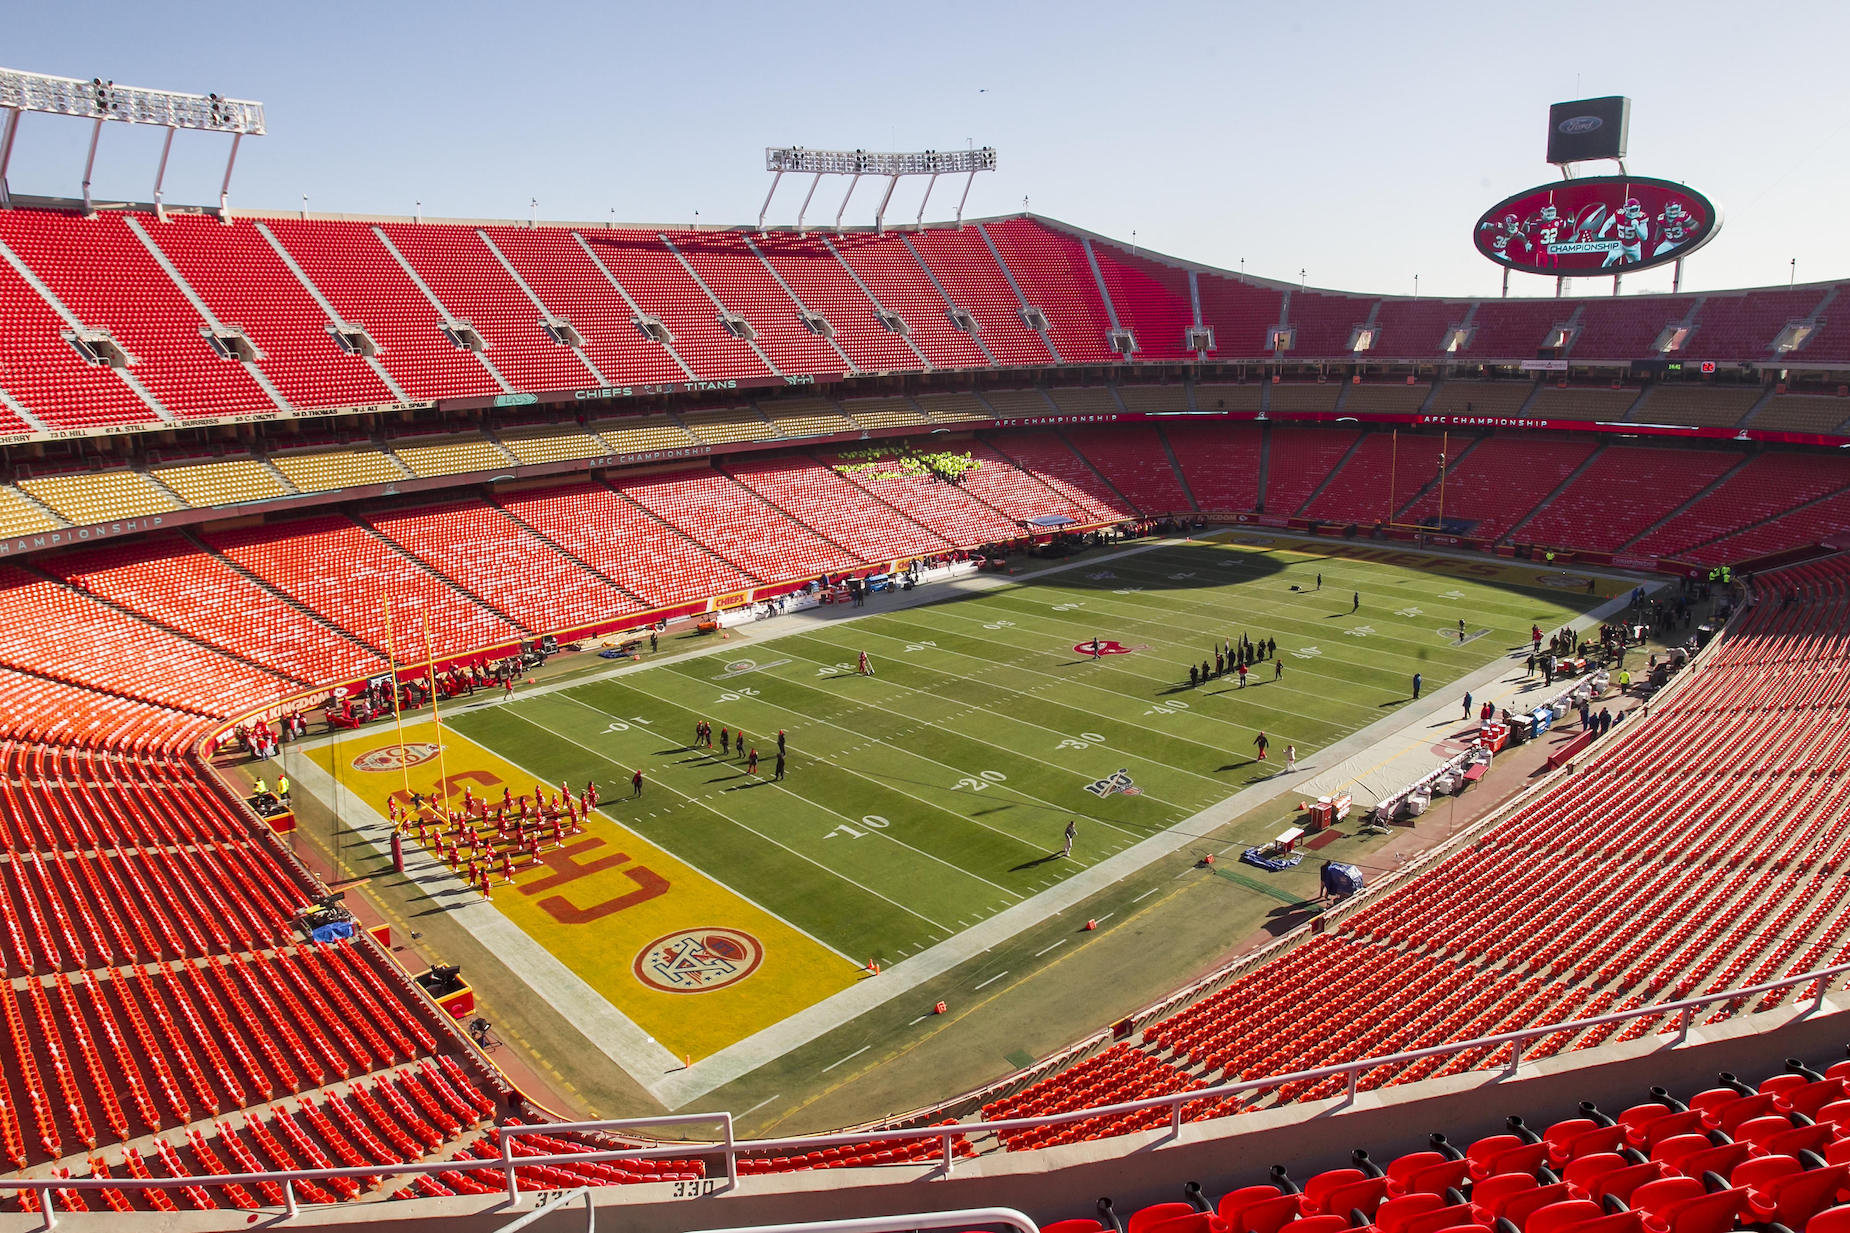 Based on the Kansas City Chiefs open practice, having in-stadium NFL fans will be easier said than done in 2020.